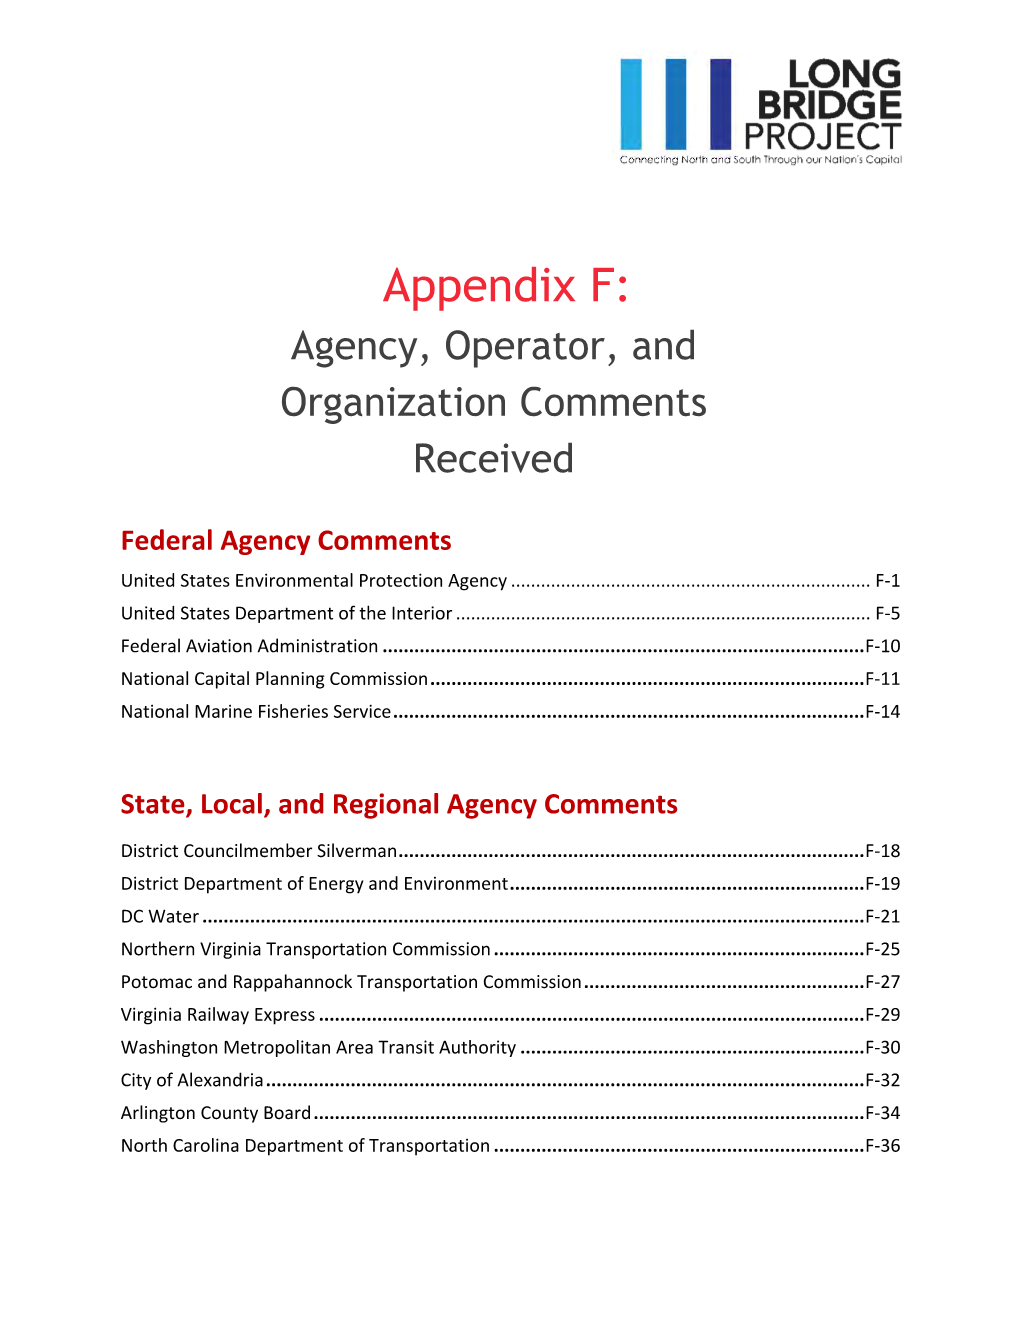 Appendix F: Agency, Operator, and Organization Comments Received